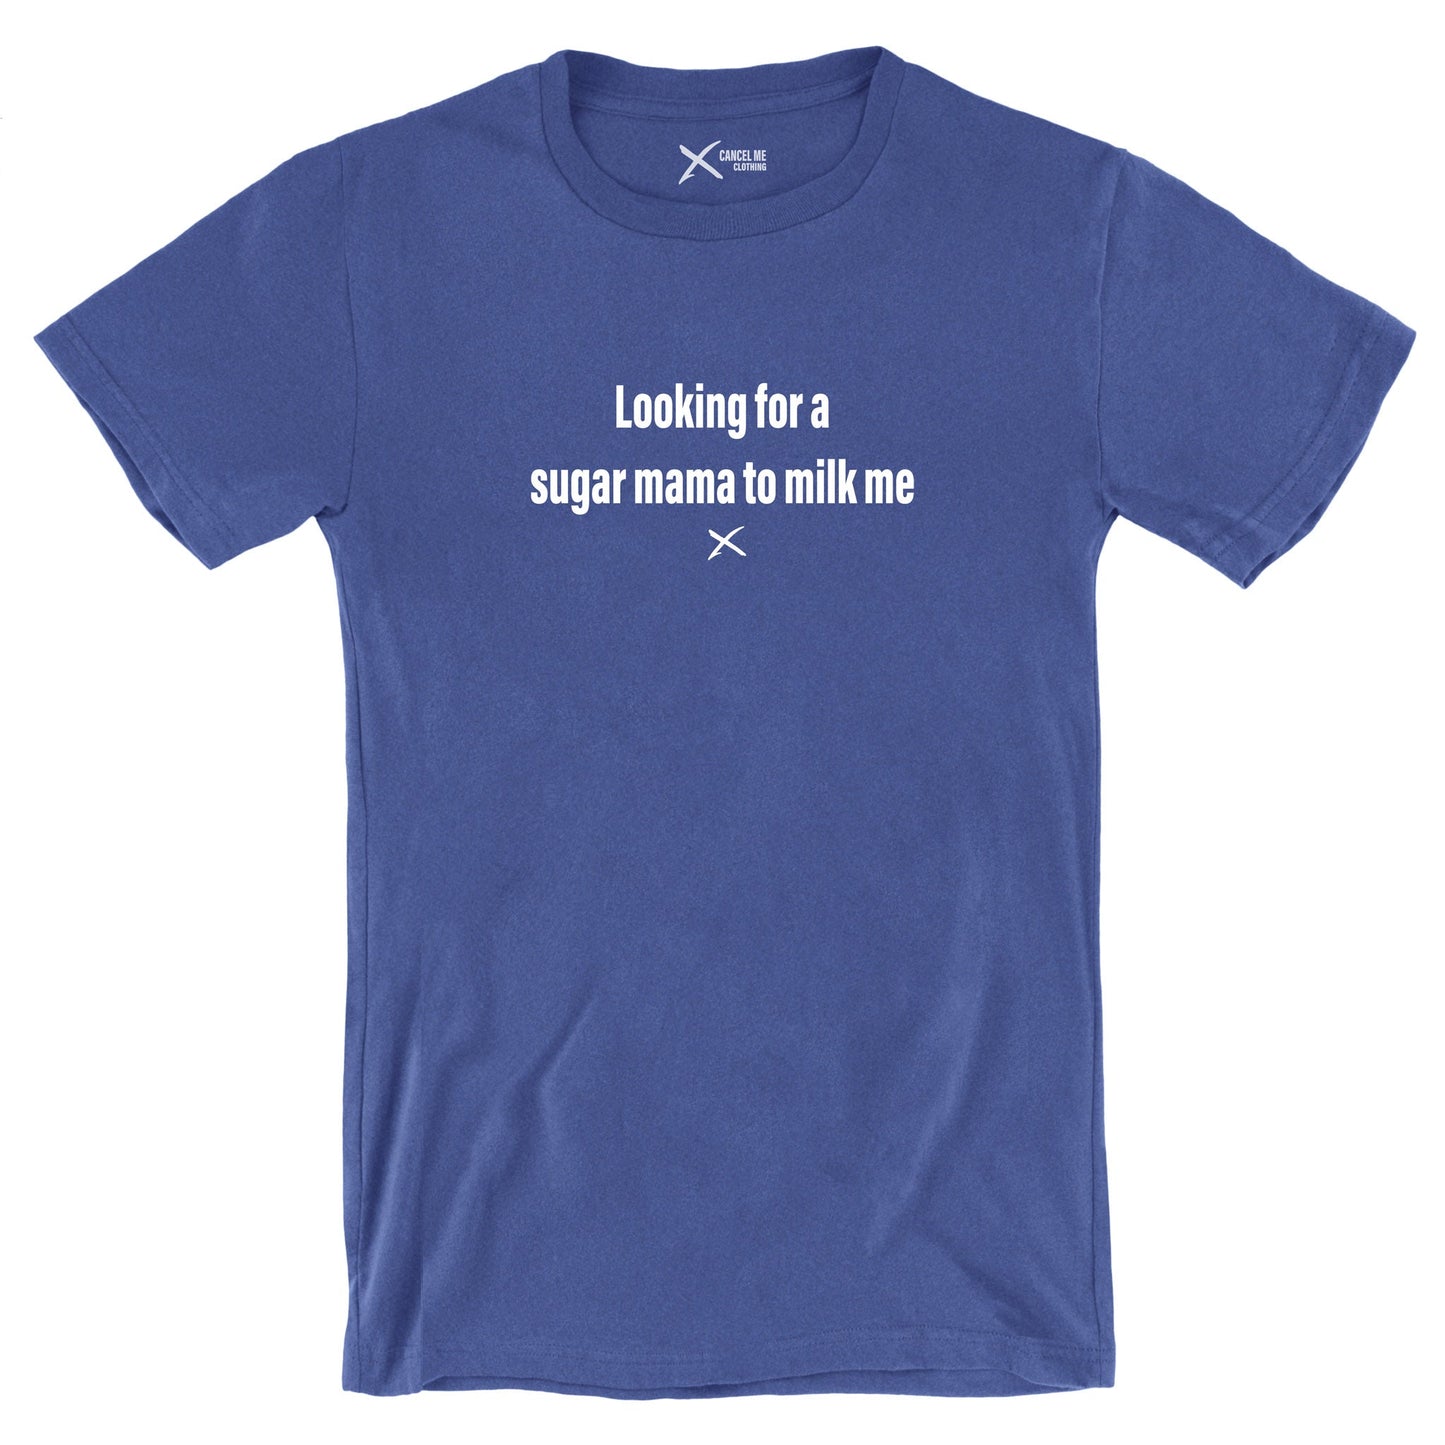 Looking for a sugar mama to milk me - Shirt